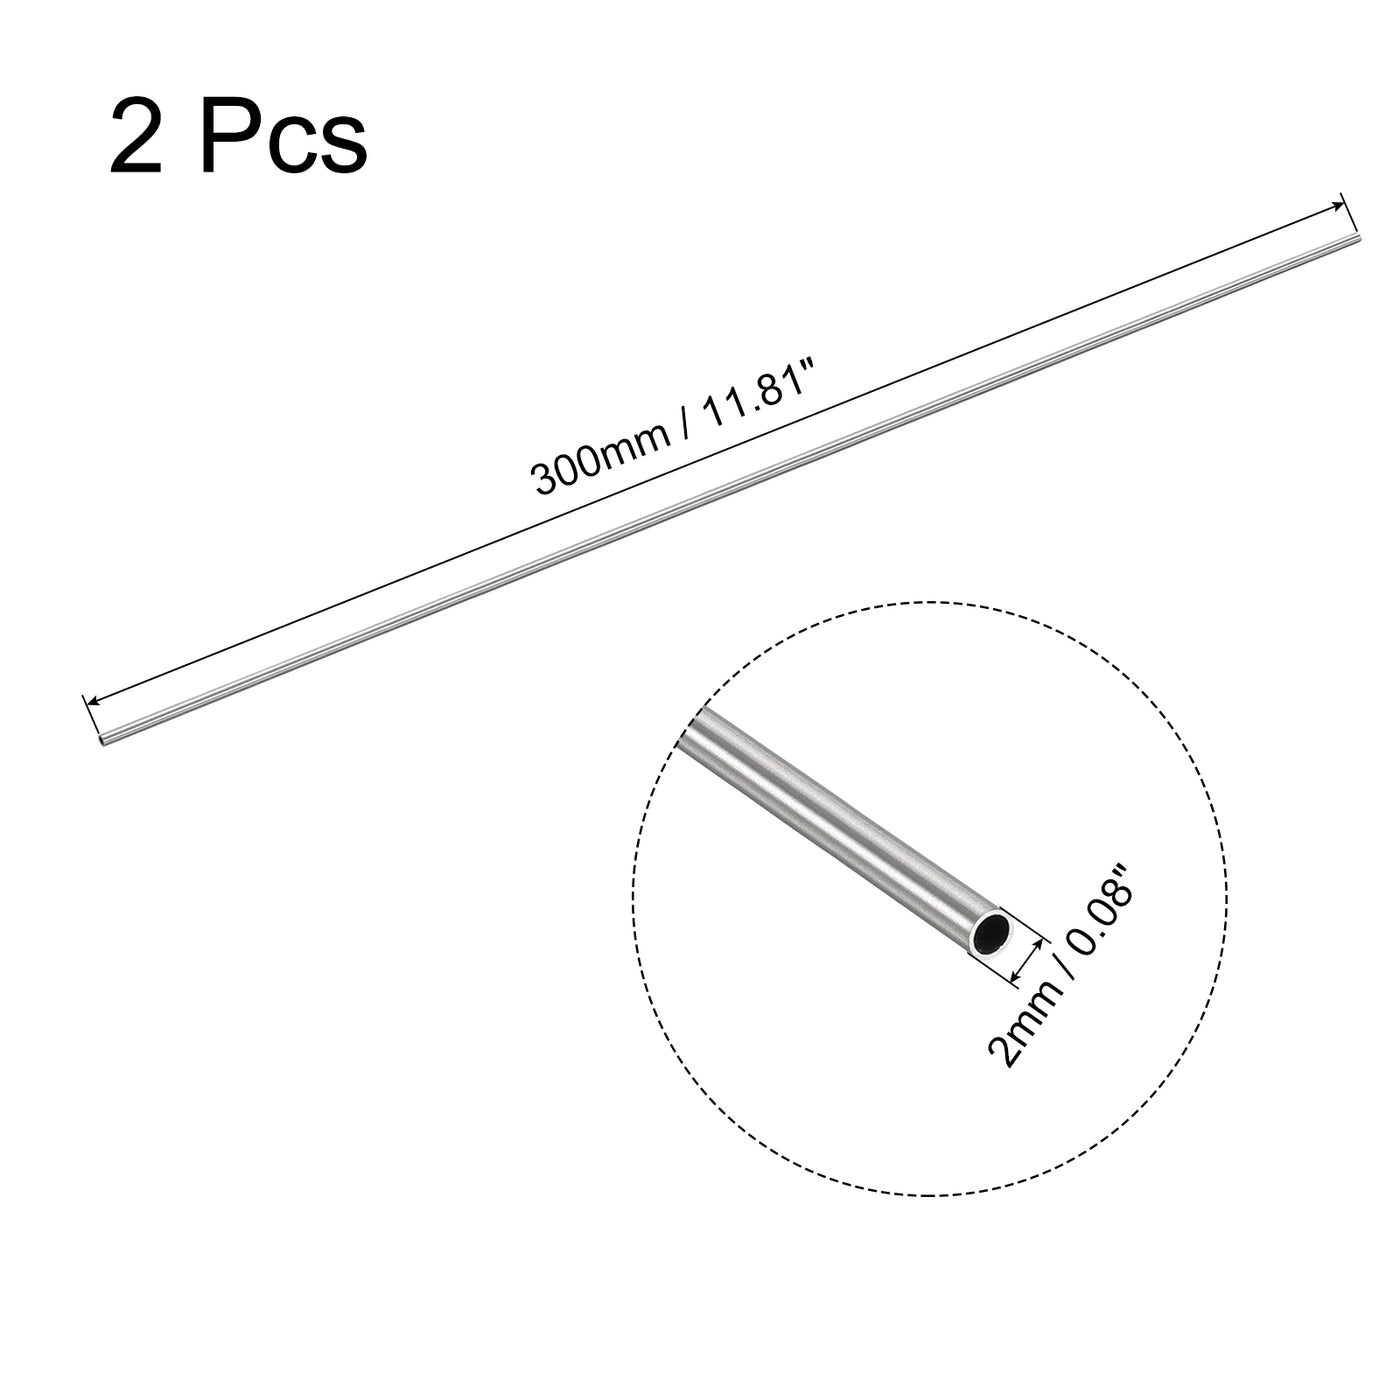 Uxcell Uxcell 304 Stainless Steel Round Tube 2mm OD 0.15mm Wall Thickness 300mm Length 2 Pcs